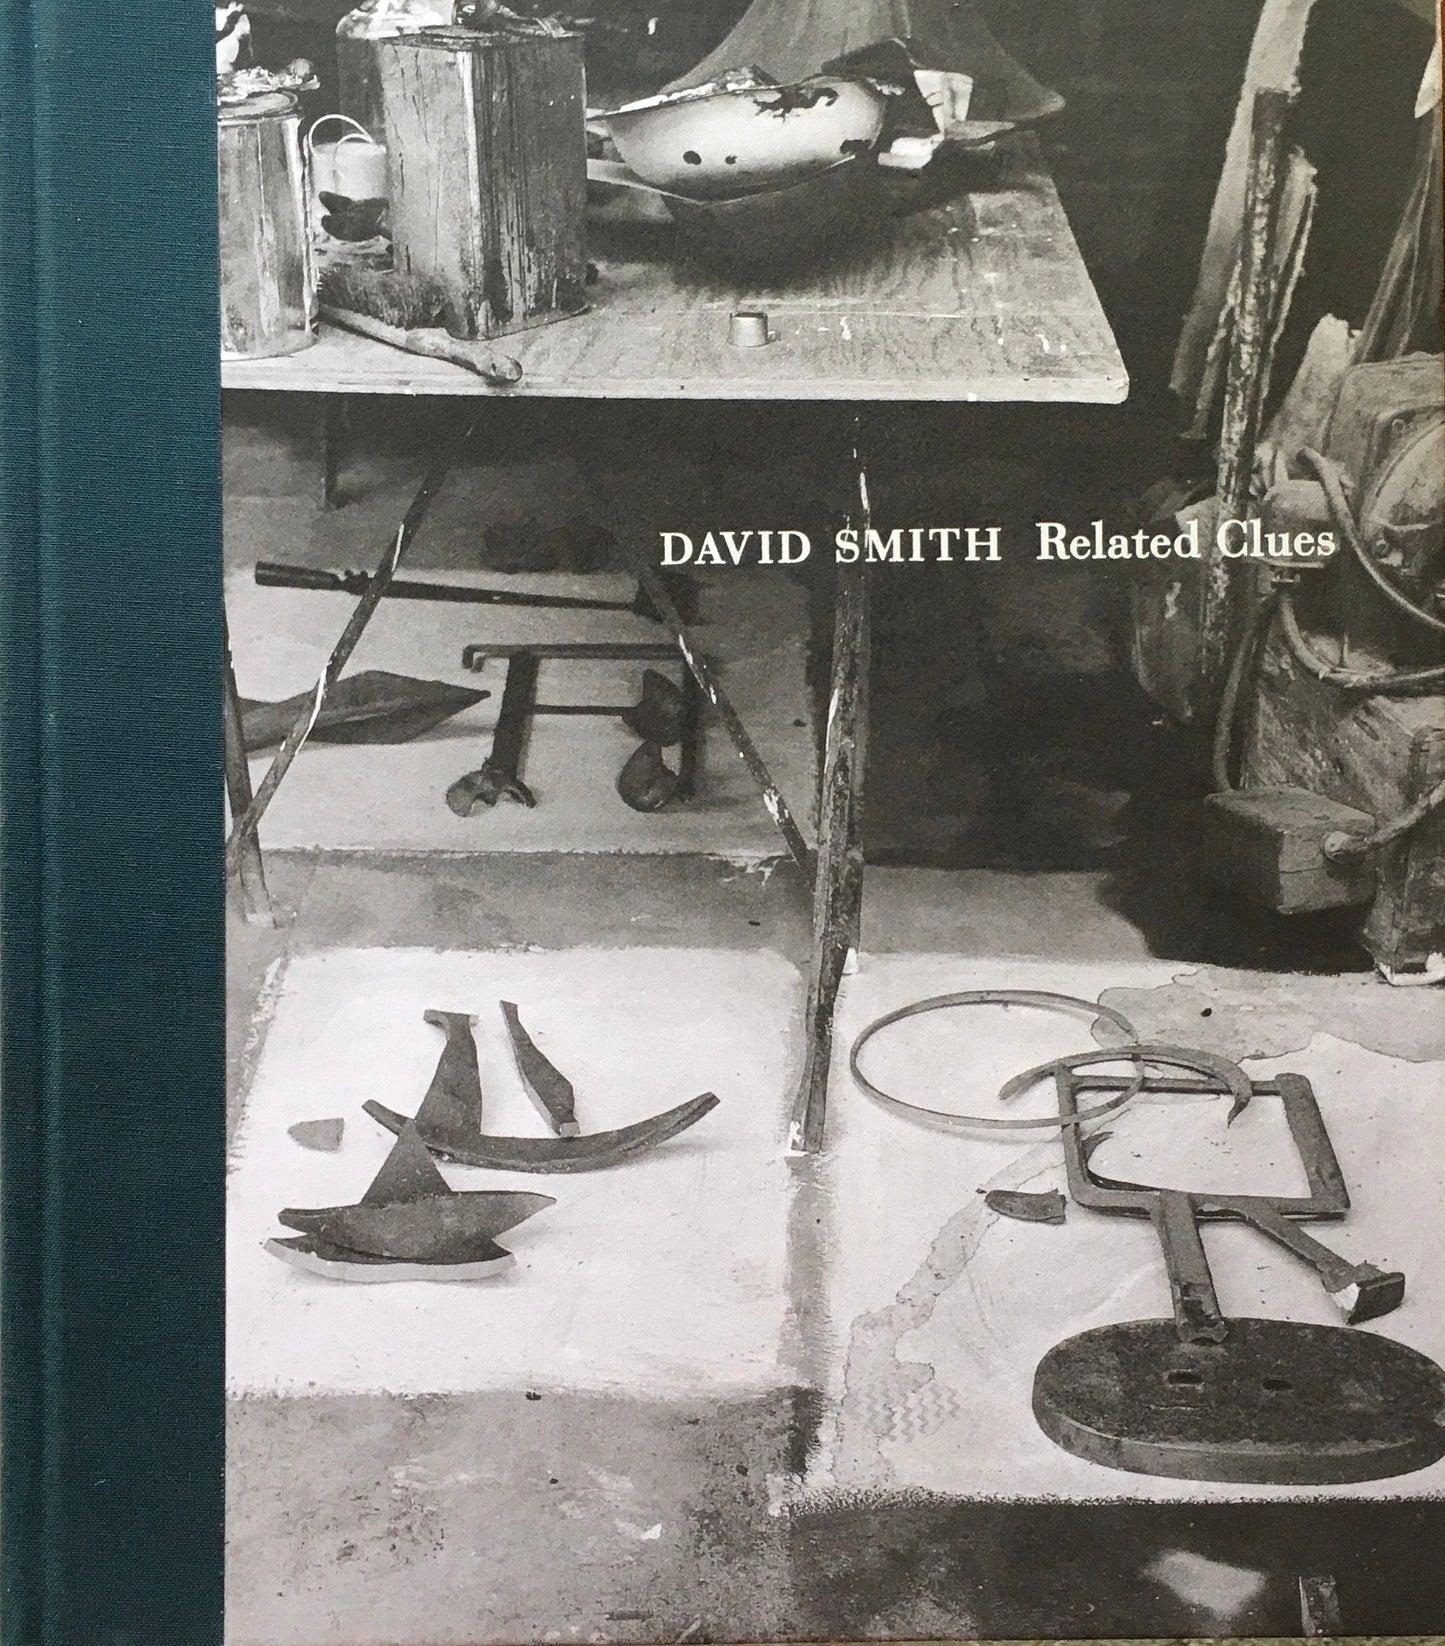 David Smith Related Clues　デイヴィッド・スミス　